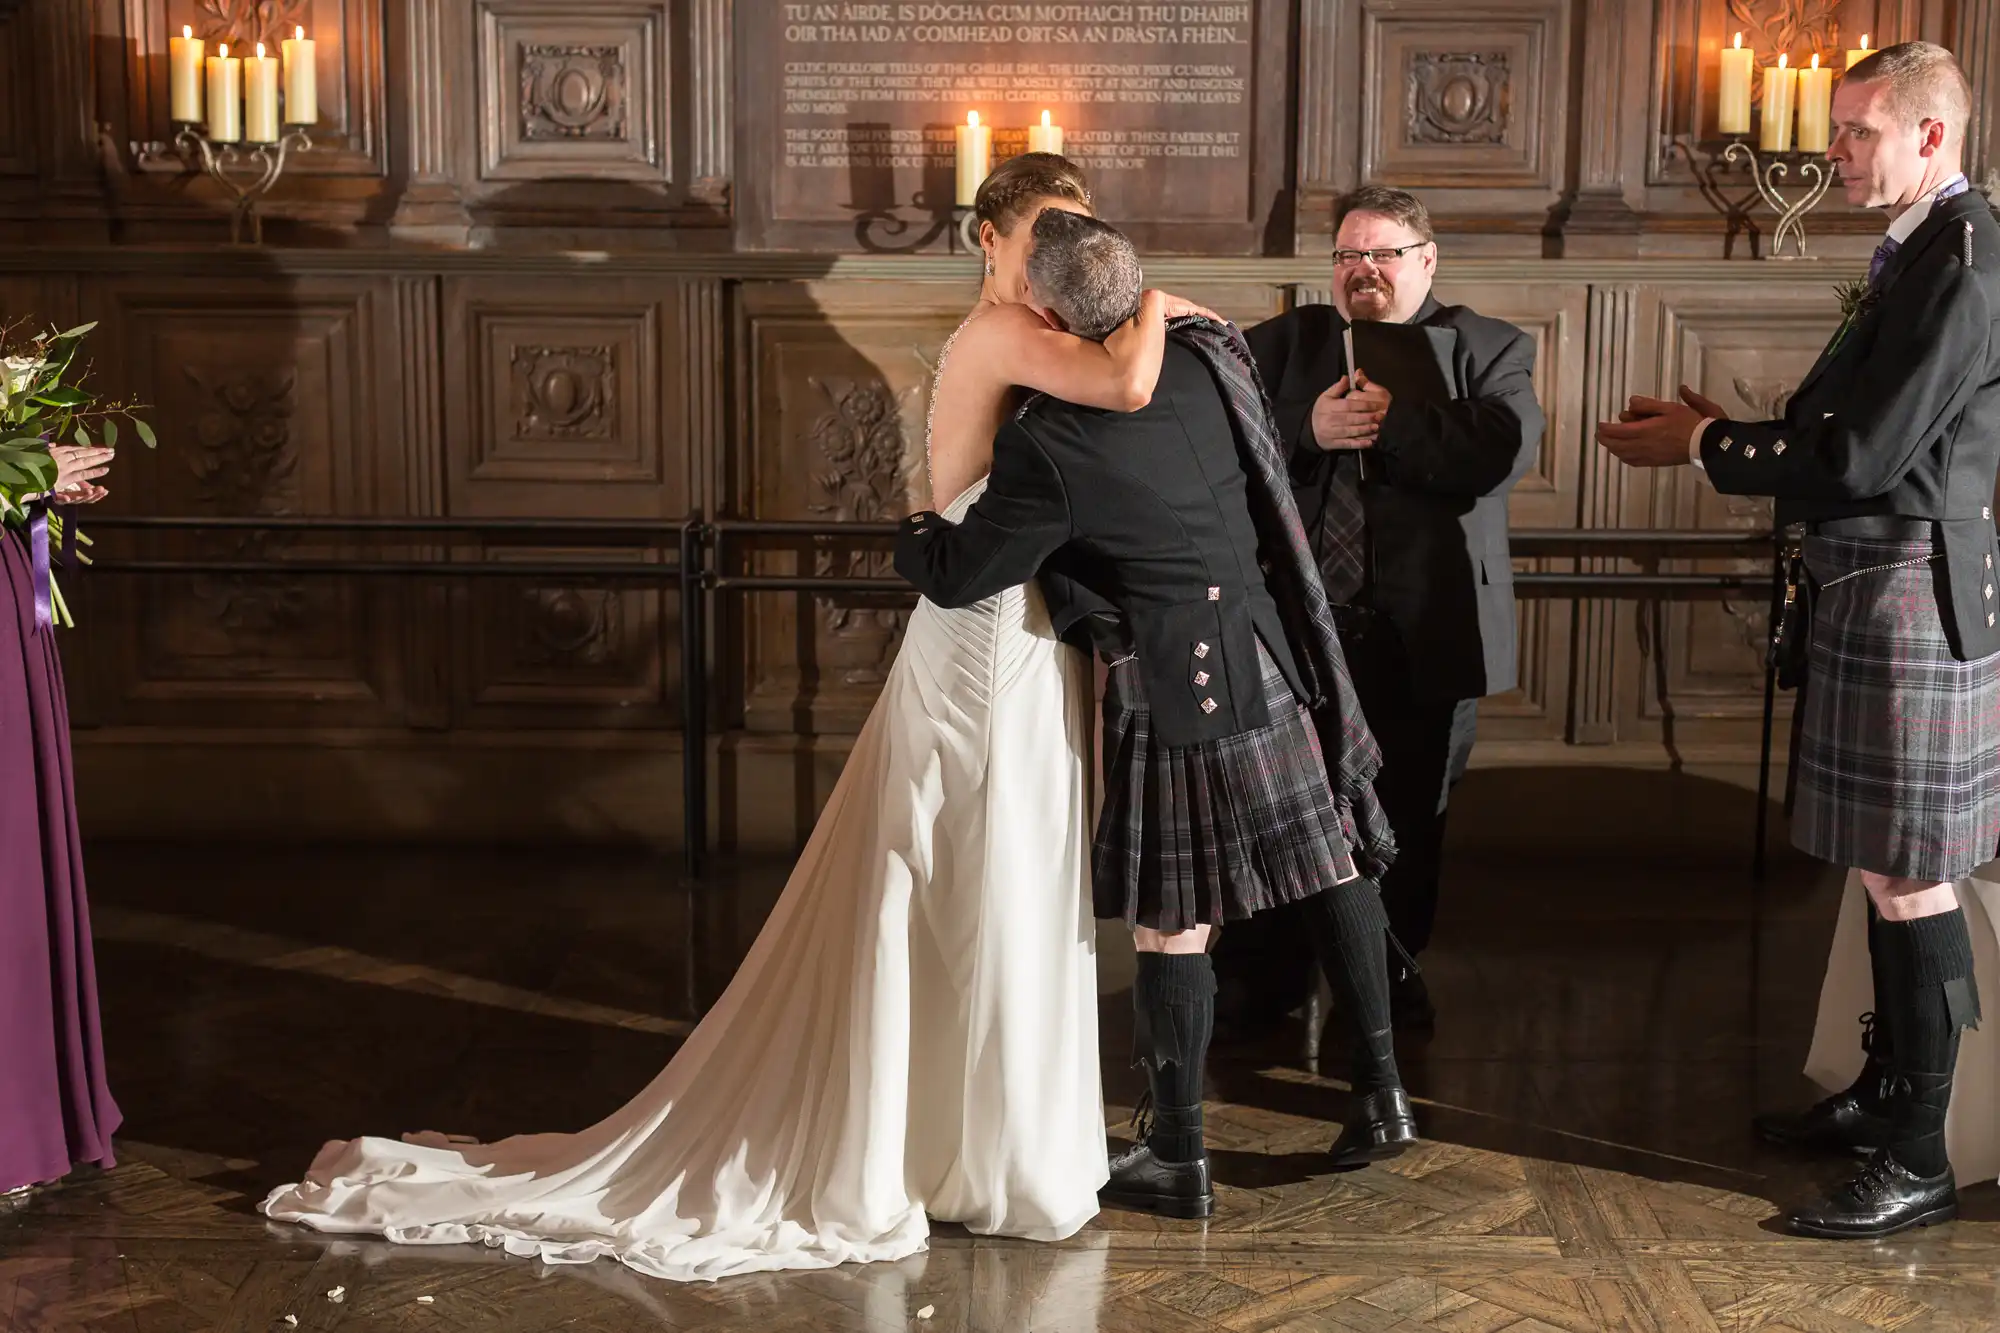 A bride and groom kissing, the groom wears a kilt. a man claps for them, and two people observe in a grand hall.